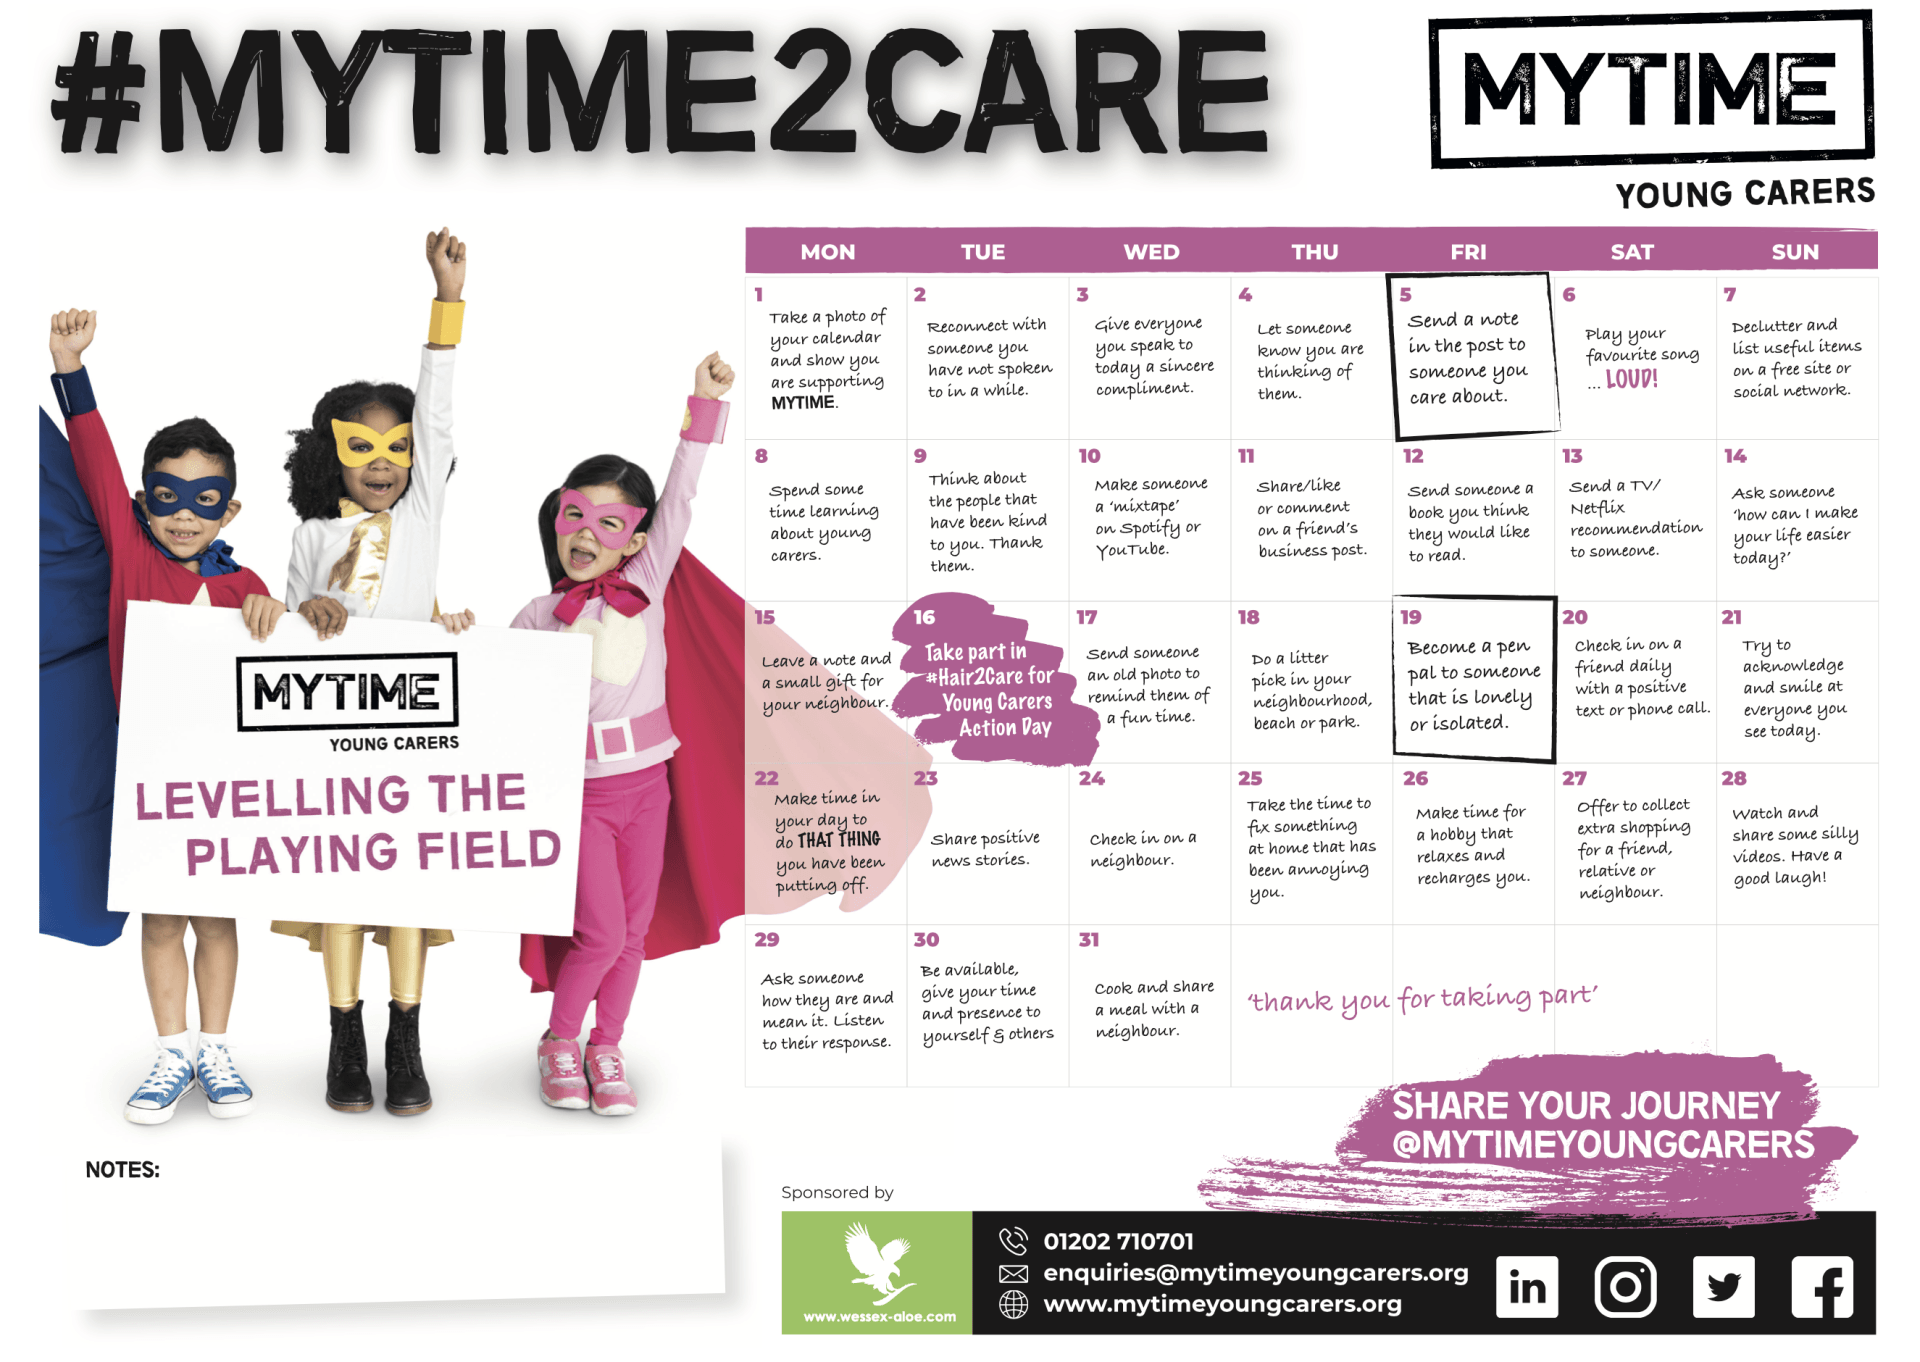 MYTIME Young Carers - Avery & Brown - Feb 2021